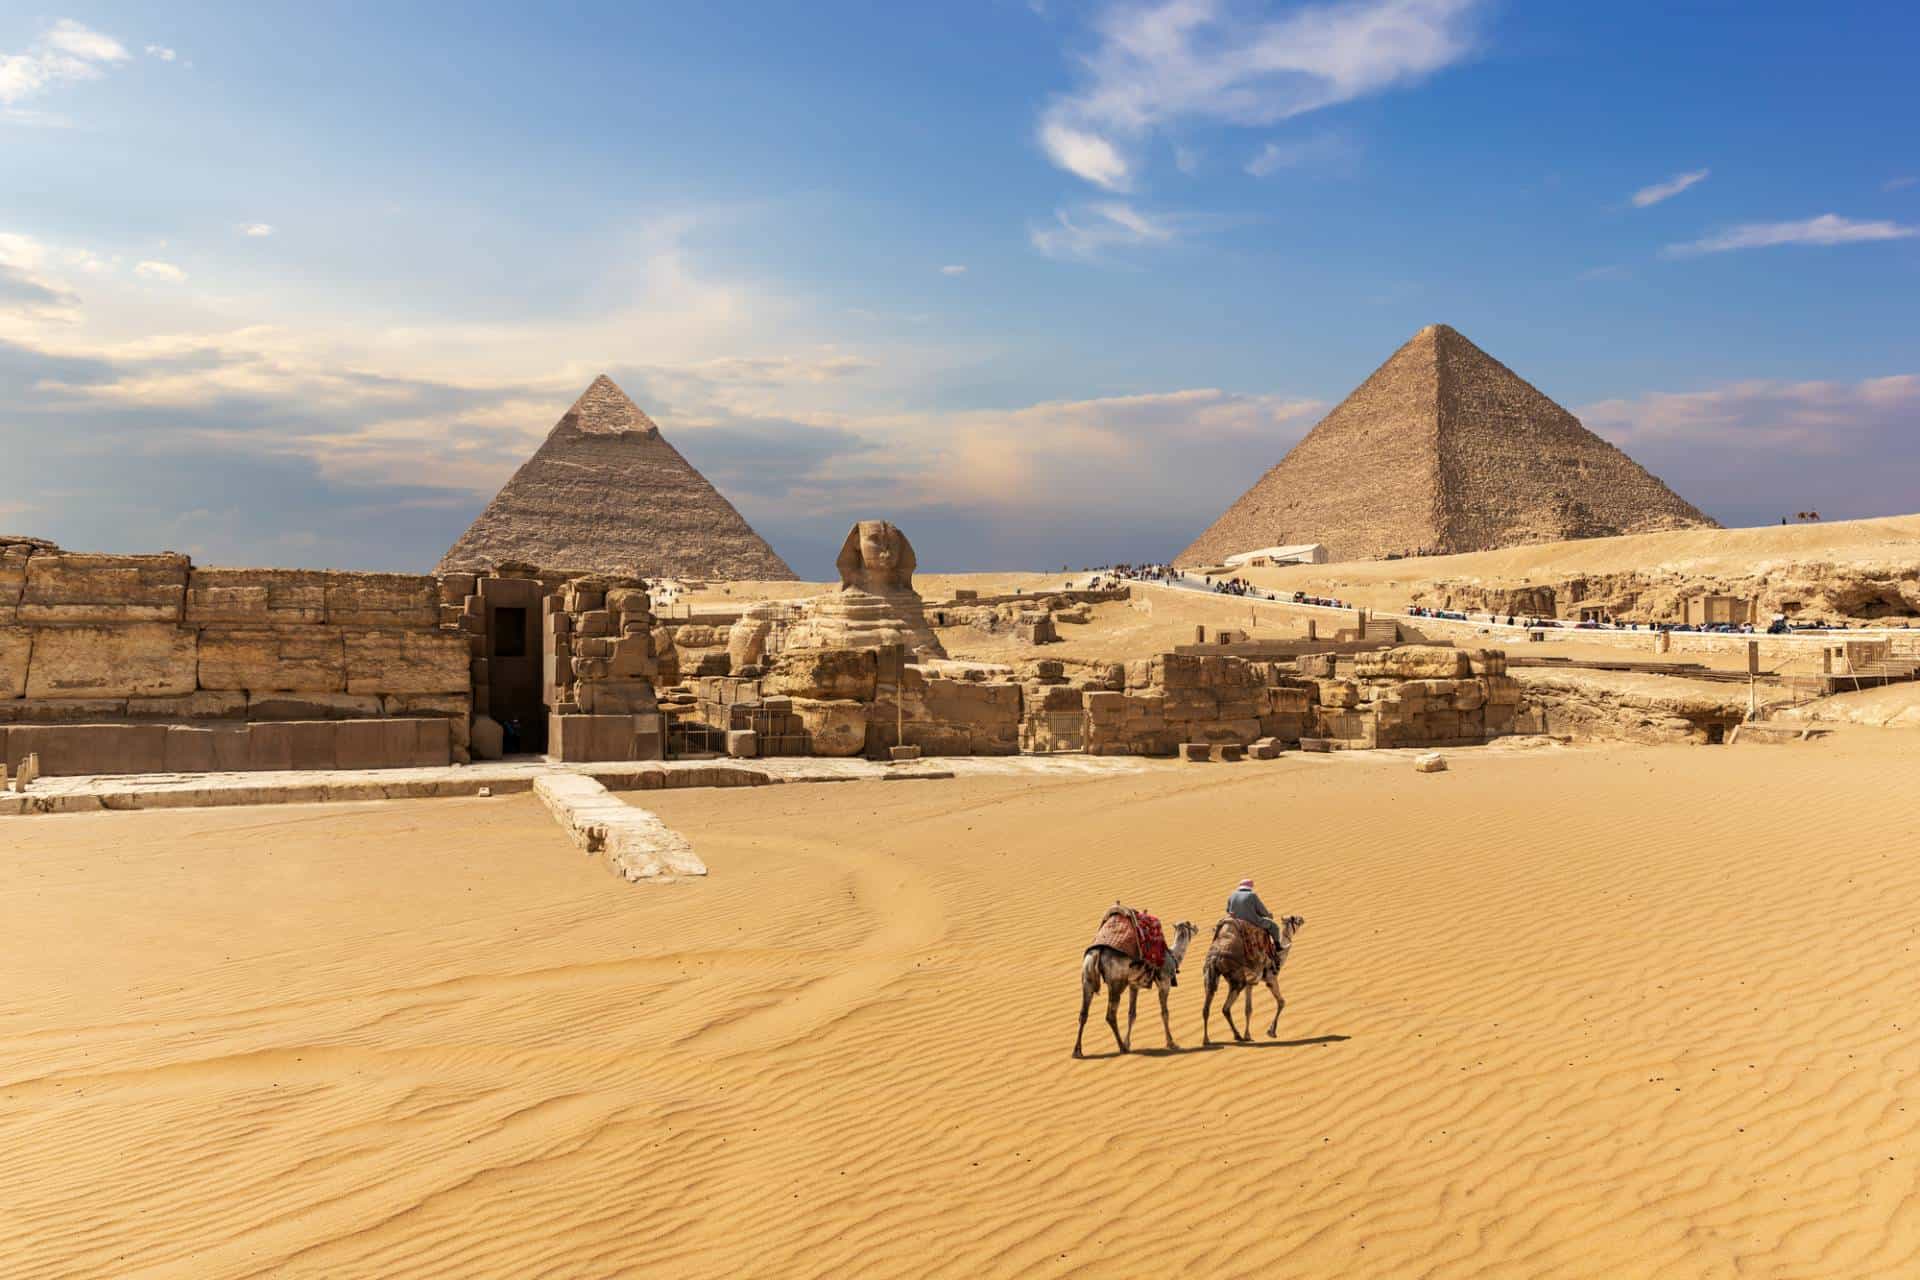 What were the Seven Wonders of the Ancient World?